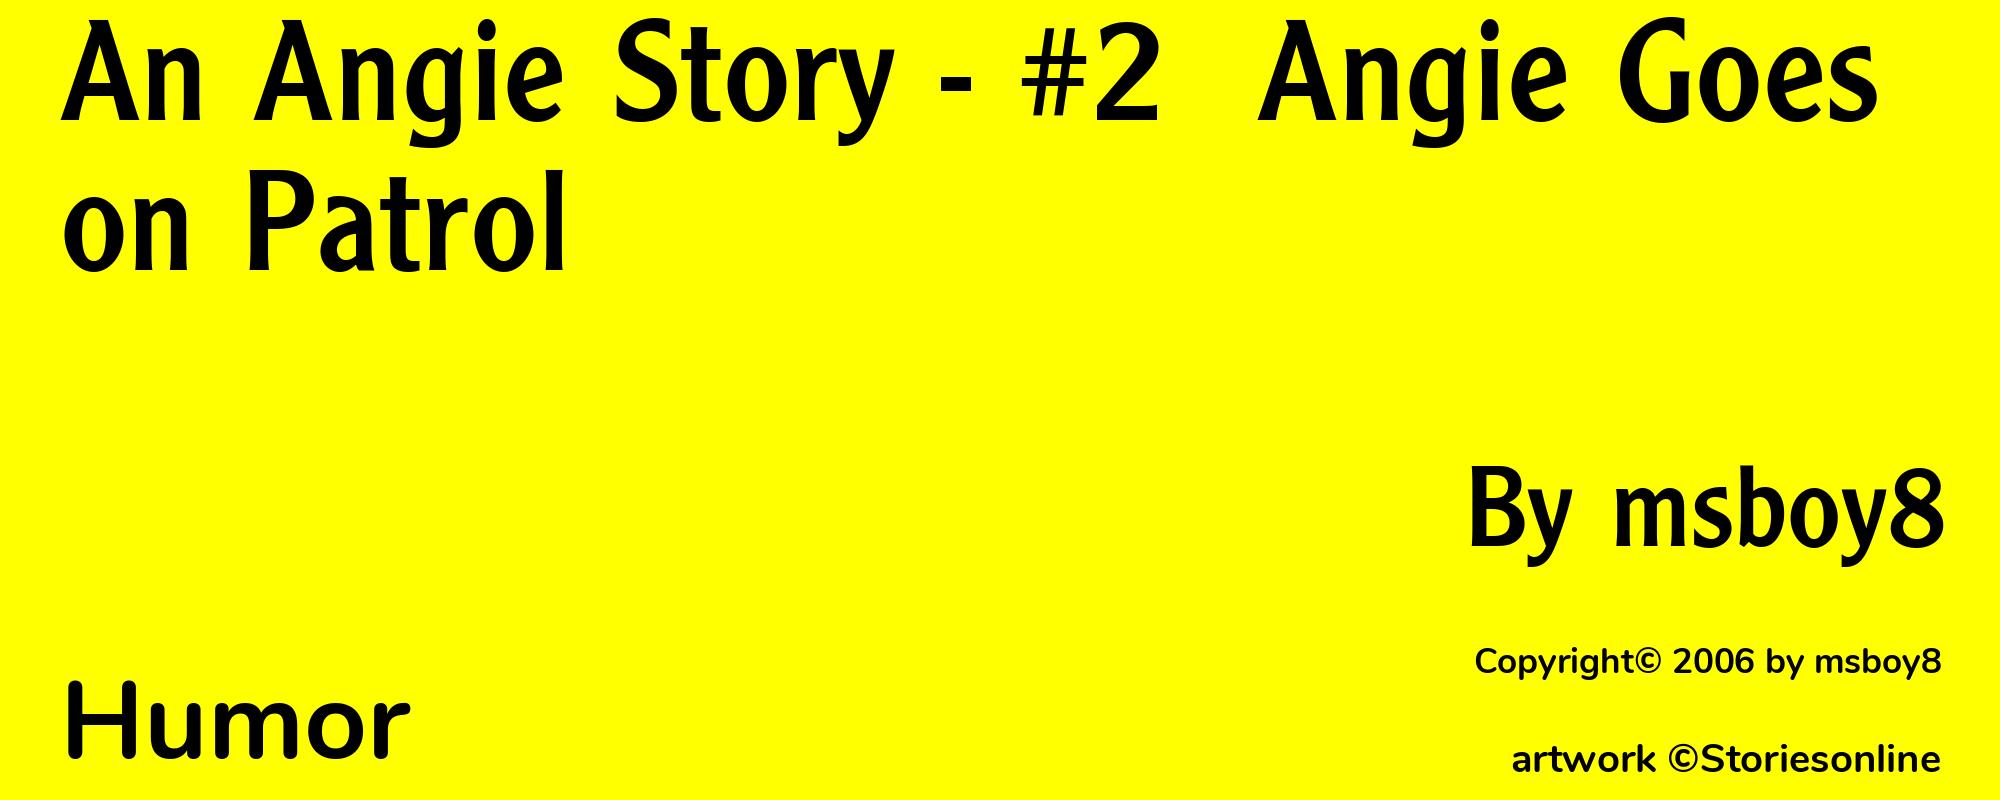 An Angie Story - #2  Angie Goes on Patrol - Cover